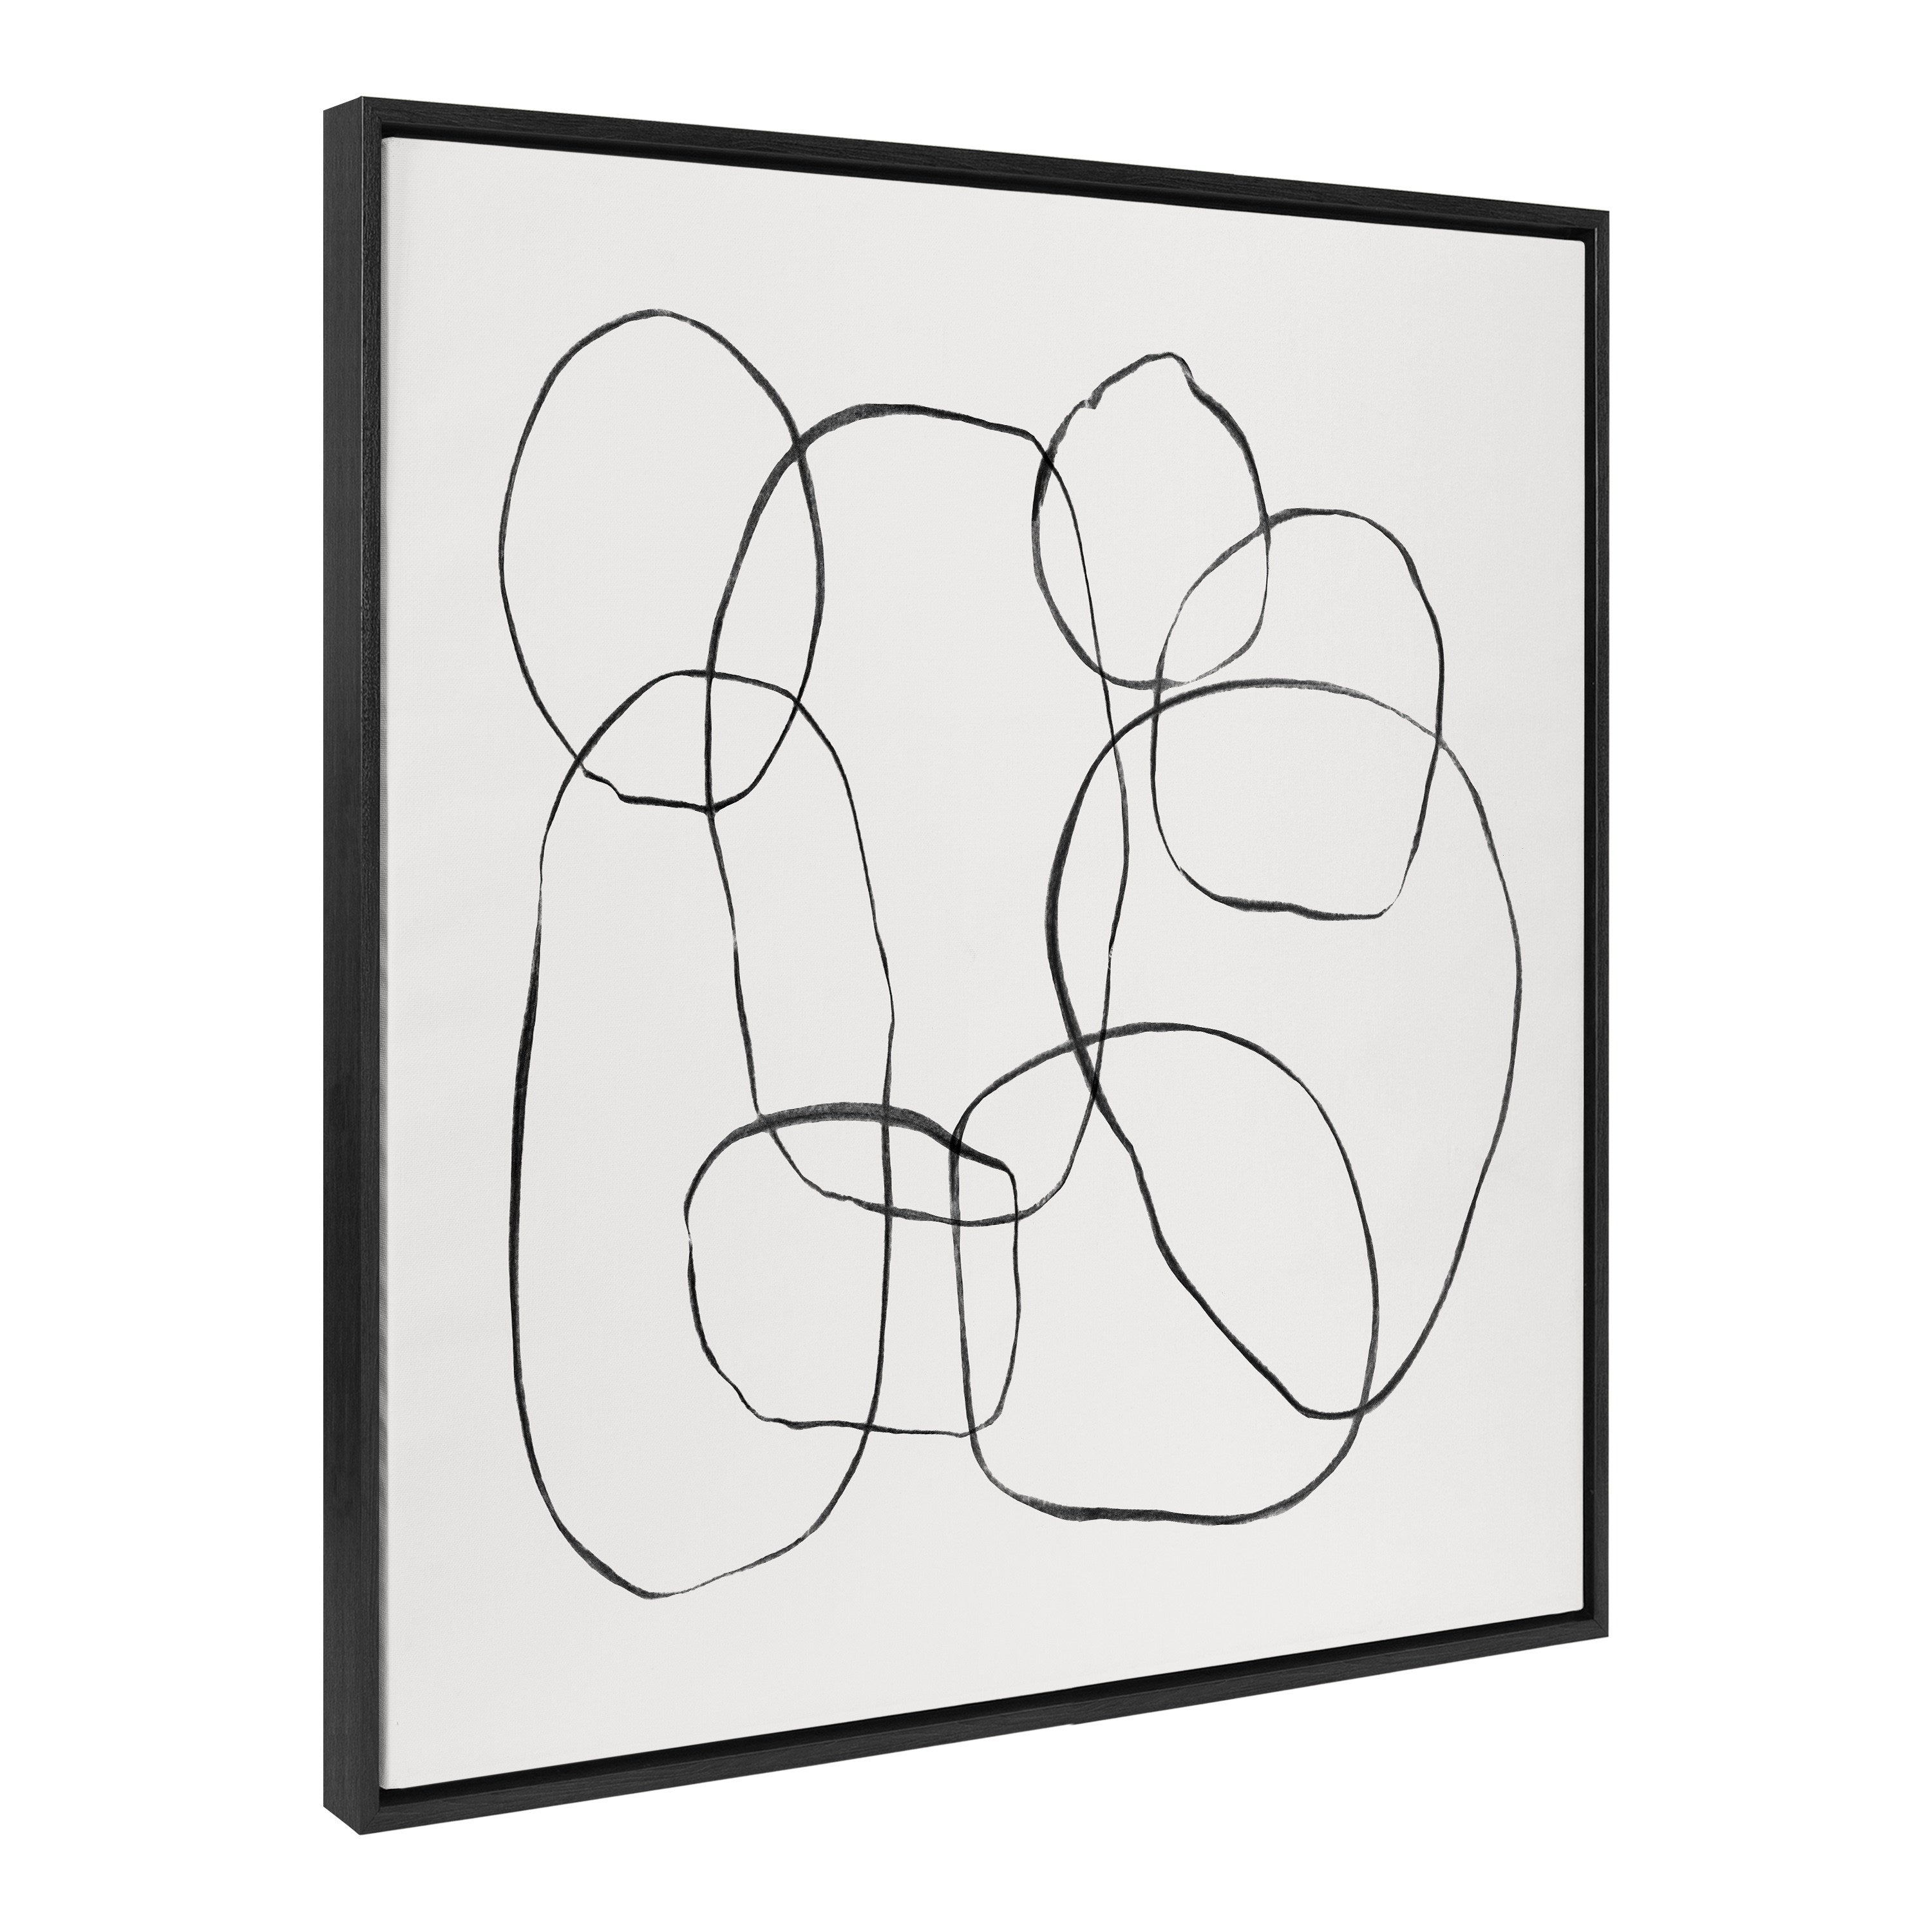 Sylvie Dancing Circles Black and Soft White Framed Canvas by Teju Reval of SnazzyHues